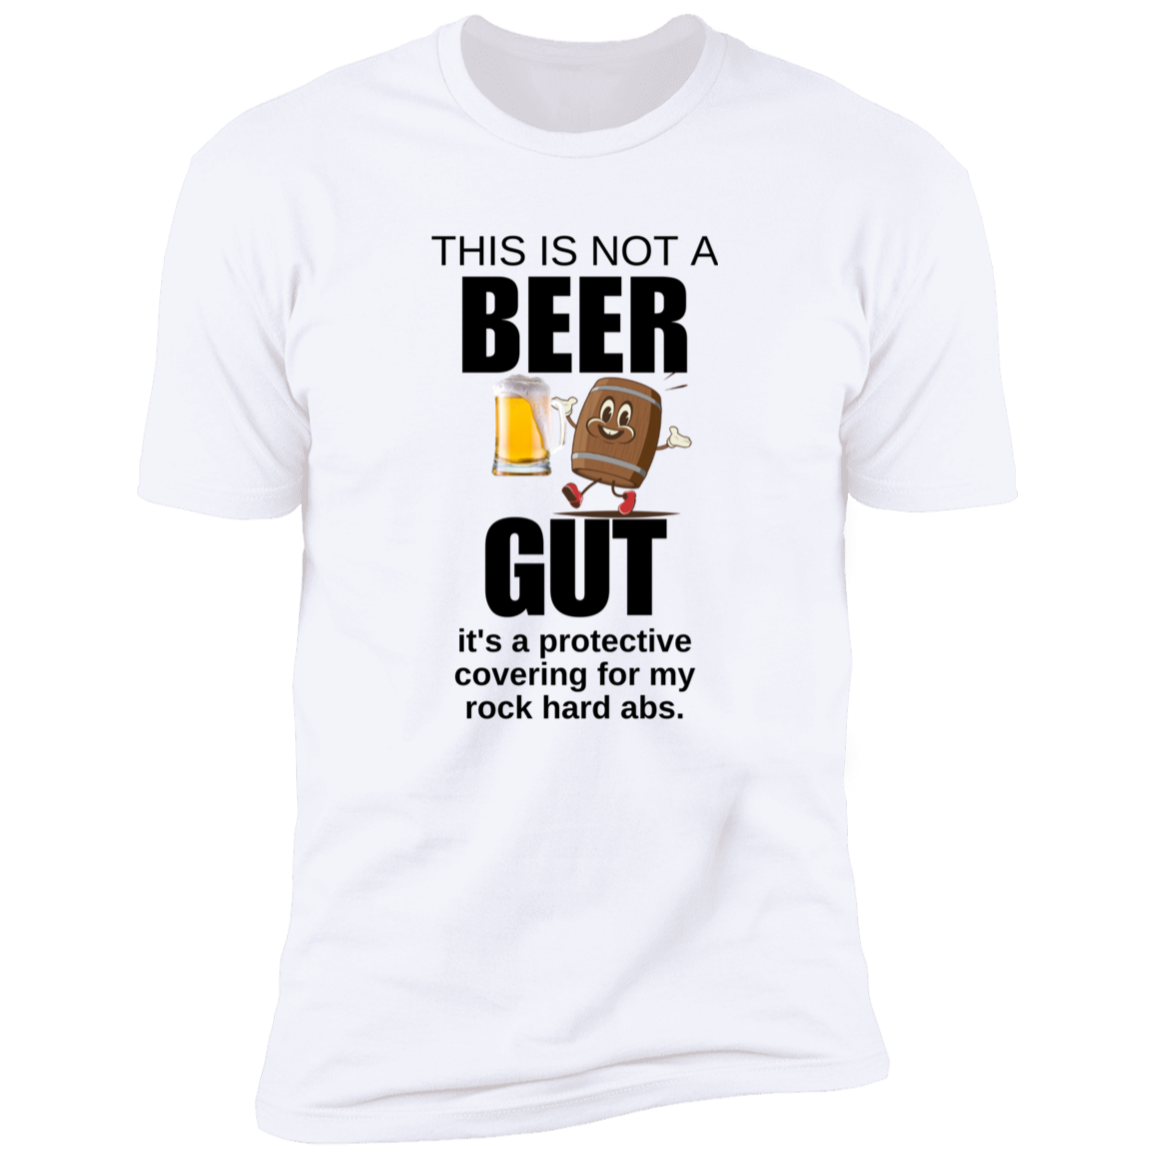 THIS IS NOT A BEER GUT  T-SHIRT